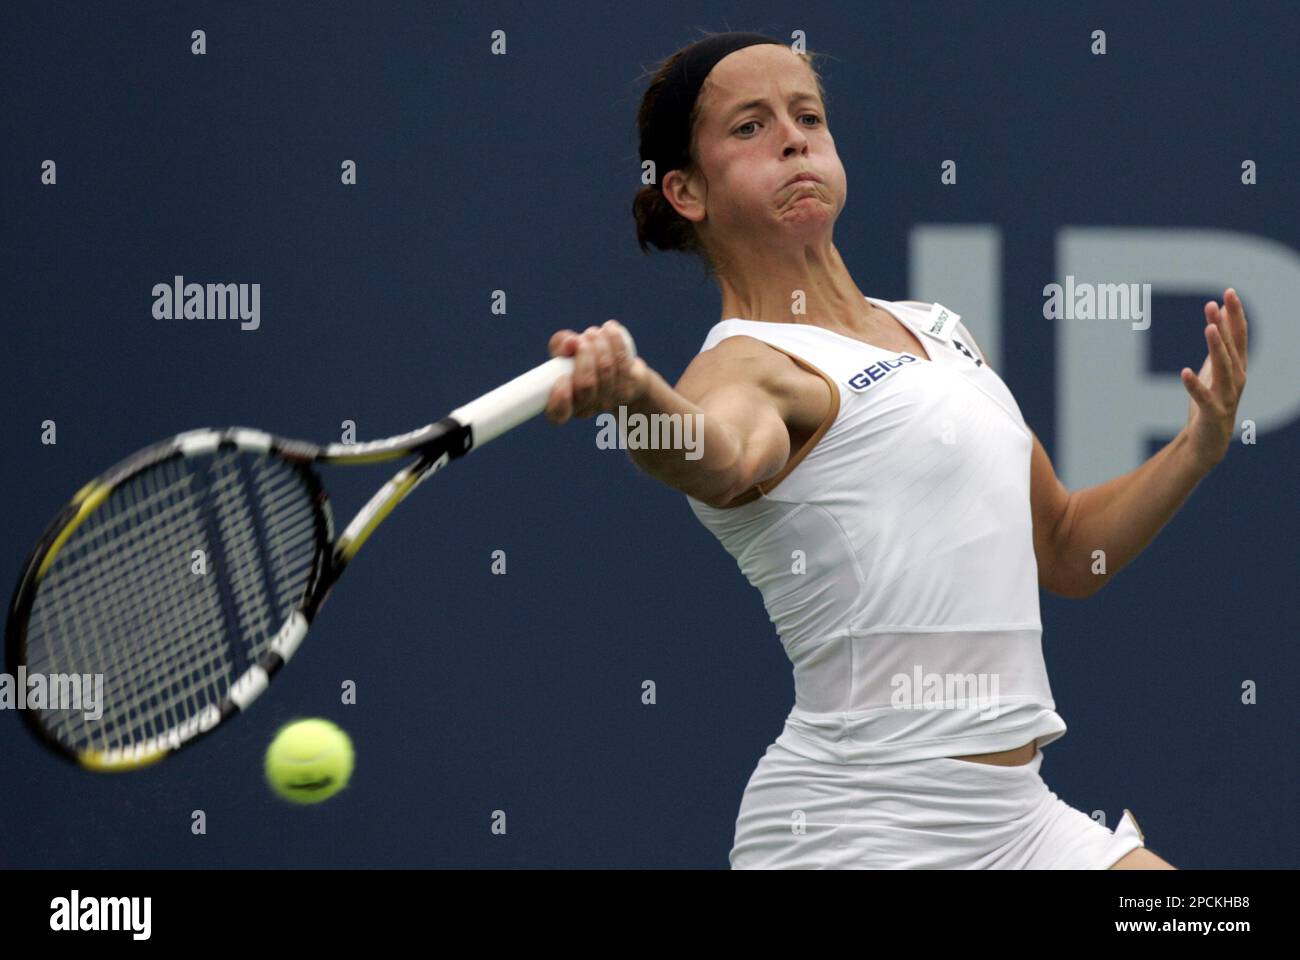 Lourdes Dominguez Lino of Spain hits a return to Serena Williams of the United States at the US Open tennis tournament in New York, Wednesday, Aug. 30, 2006. (AP Photo/Julie Jacobson) Stock Photo